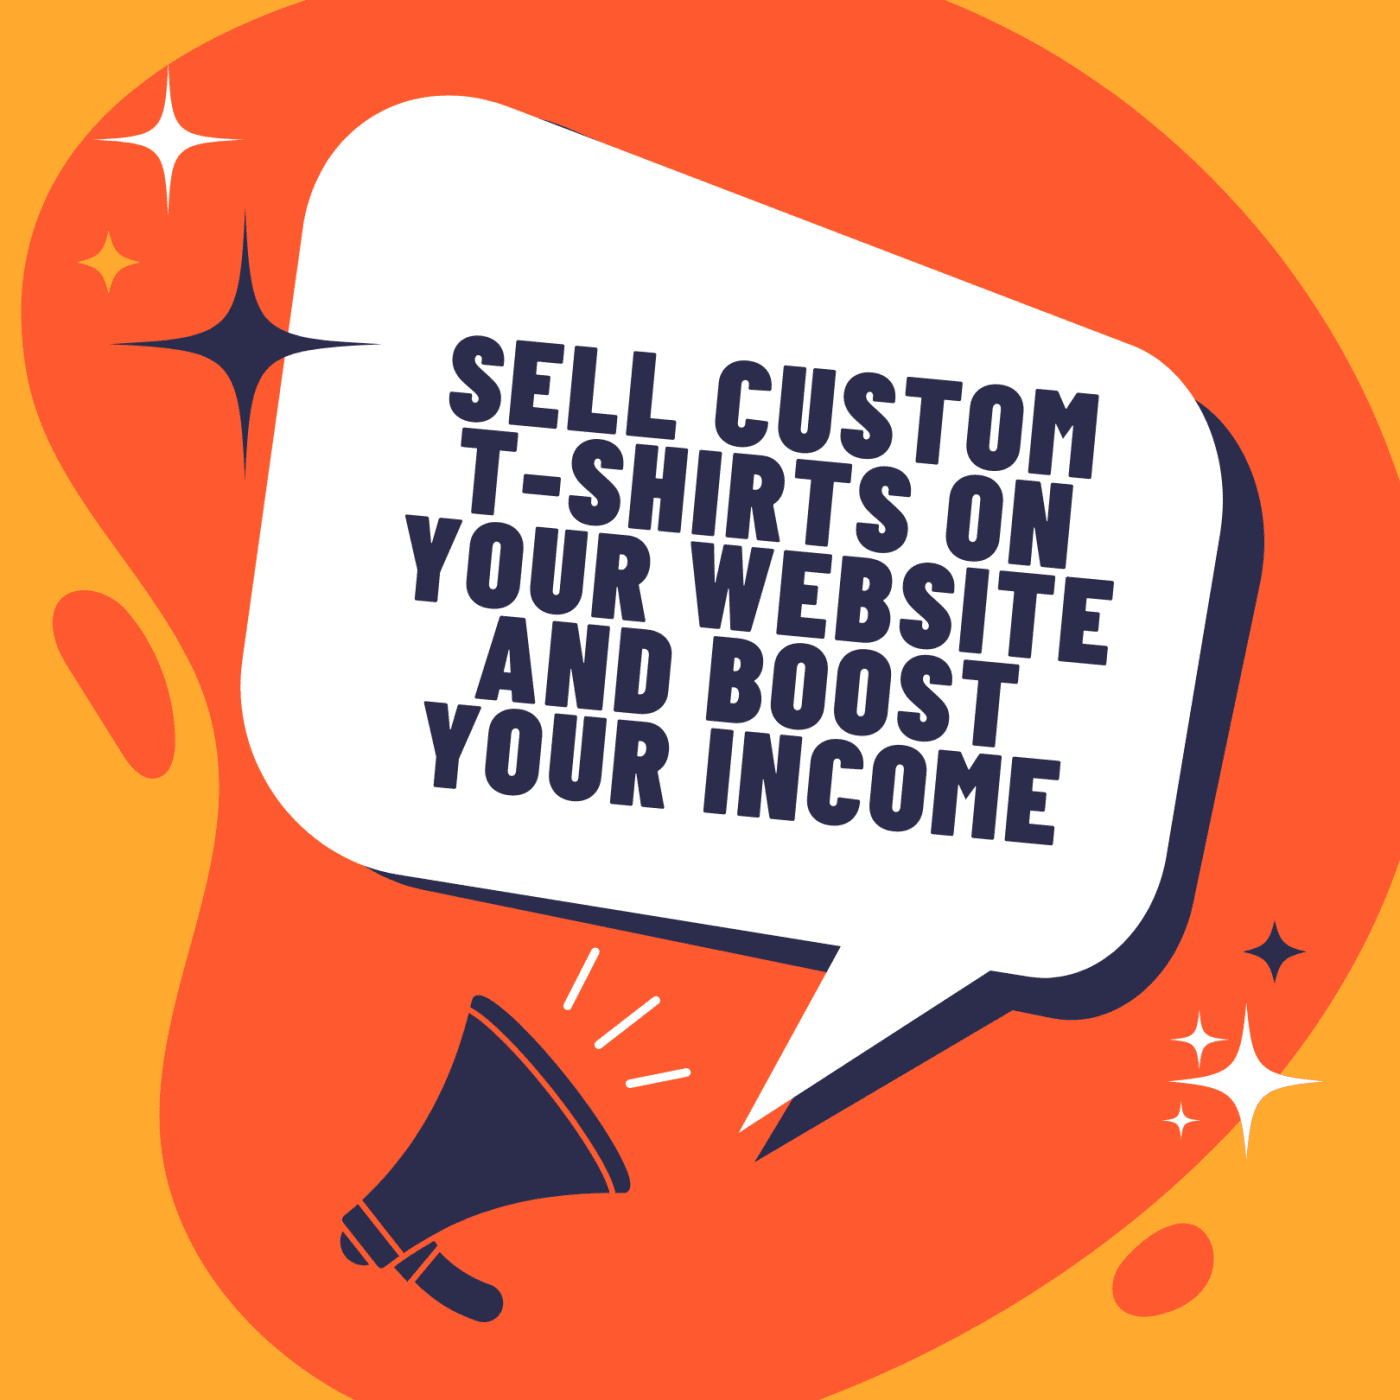 Sell Custom T-Shirts on Your Website and Boost Your Income